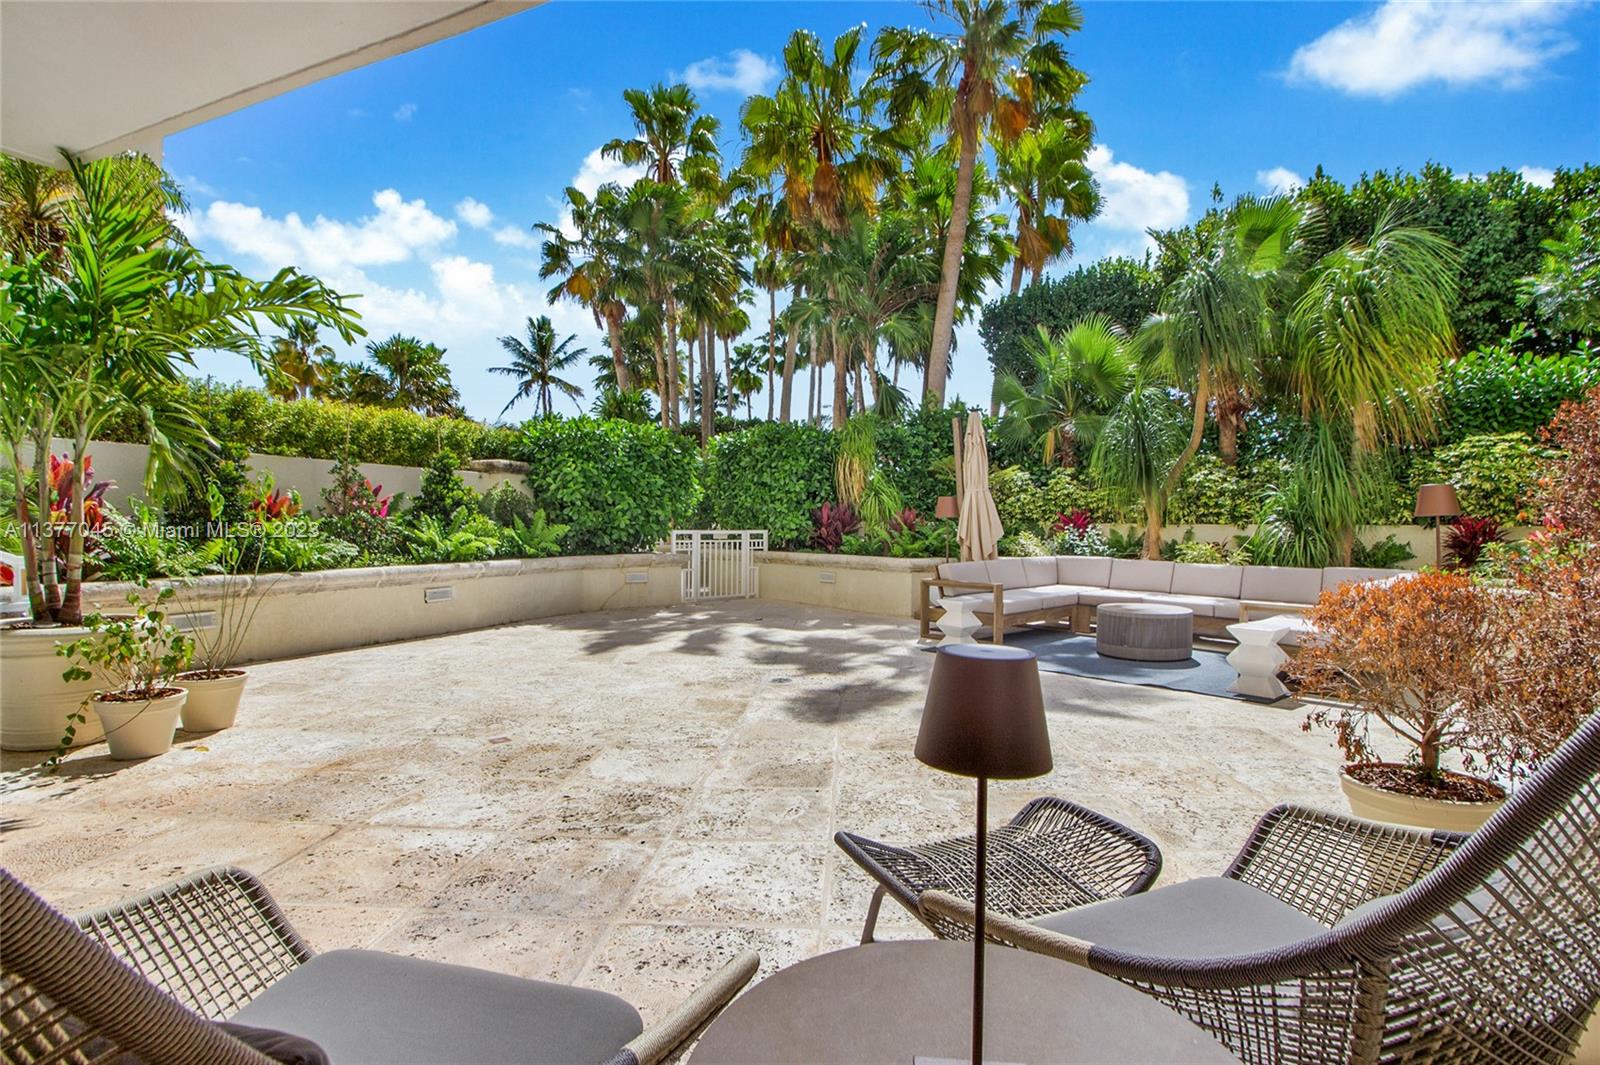 THE SIZE, LOOK & FEEL OF A SINGLE, FAMILY HOME, PLUS THE SECURITY & AMENITIES OF A LUXURY, BEACH RESORT CONDOMINIUM! One of a kind, rarely available, 4 bedrooms, 4.5 baths, 3989 sq. ft. unit with TWO ENORMOUS, LANAI TERRACES, perfect for entertaining! Completely renovated, designer finished interior! Spacious interior includes a large family room, living/dining room, gourmet kitchen, over sized closets, staff quarters and laundry room! STEPS FROM THE BEACH! Three parking spaces, 472, 250 and 128.